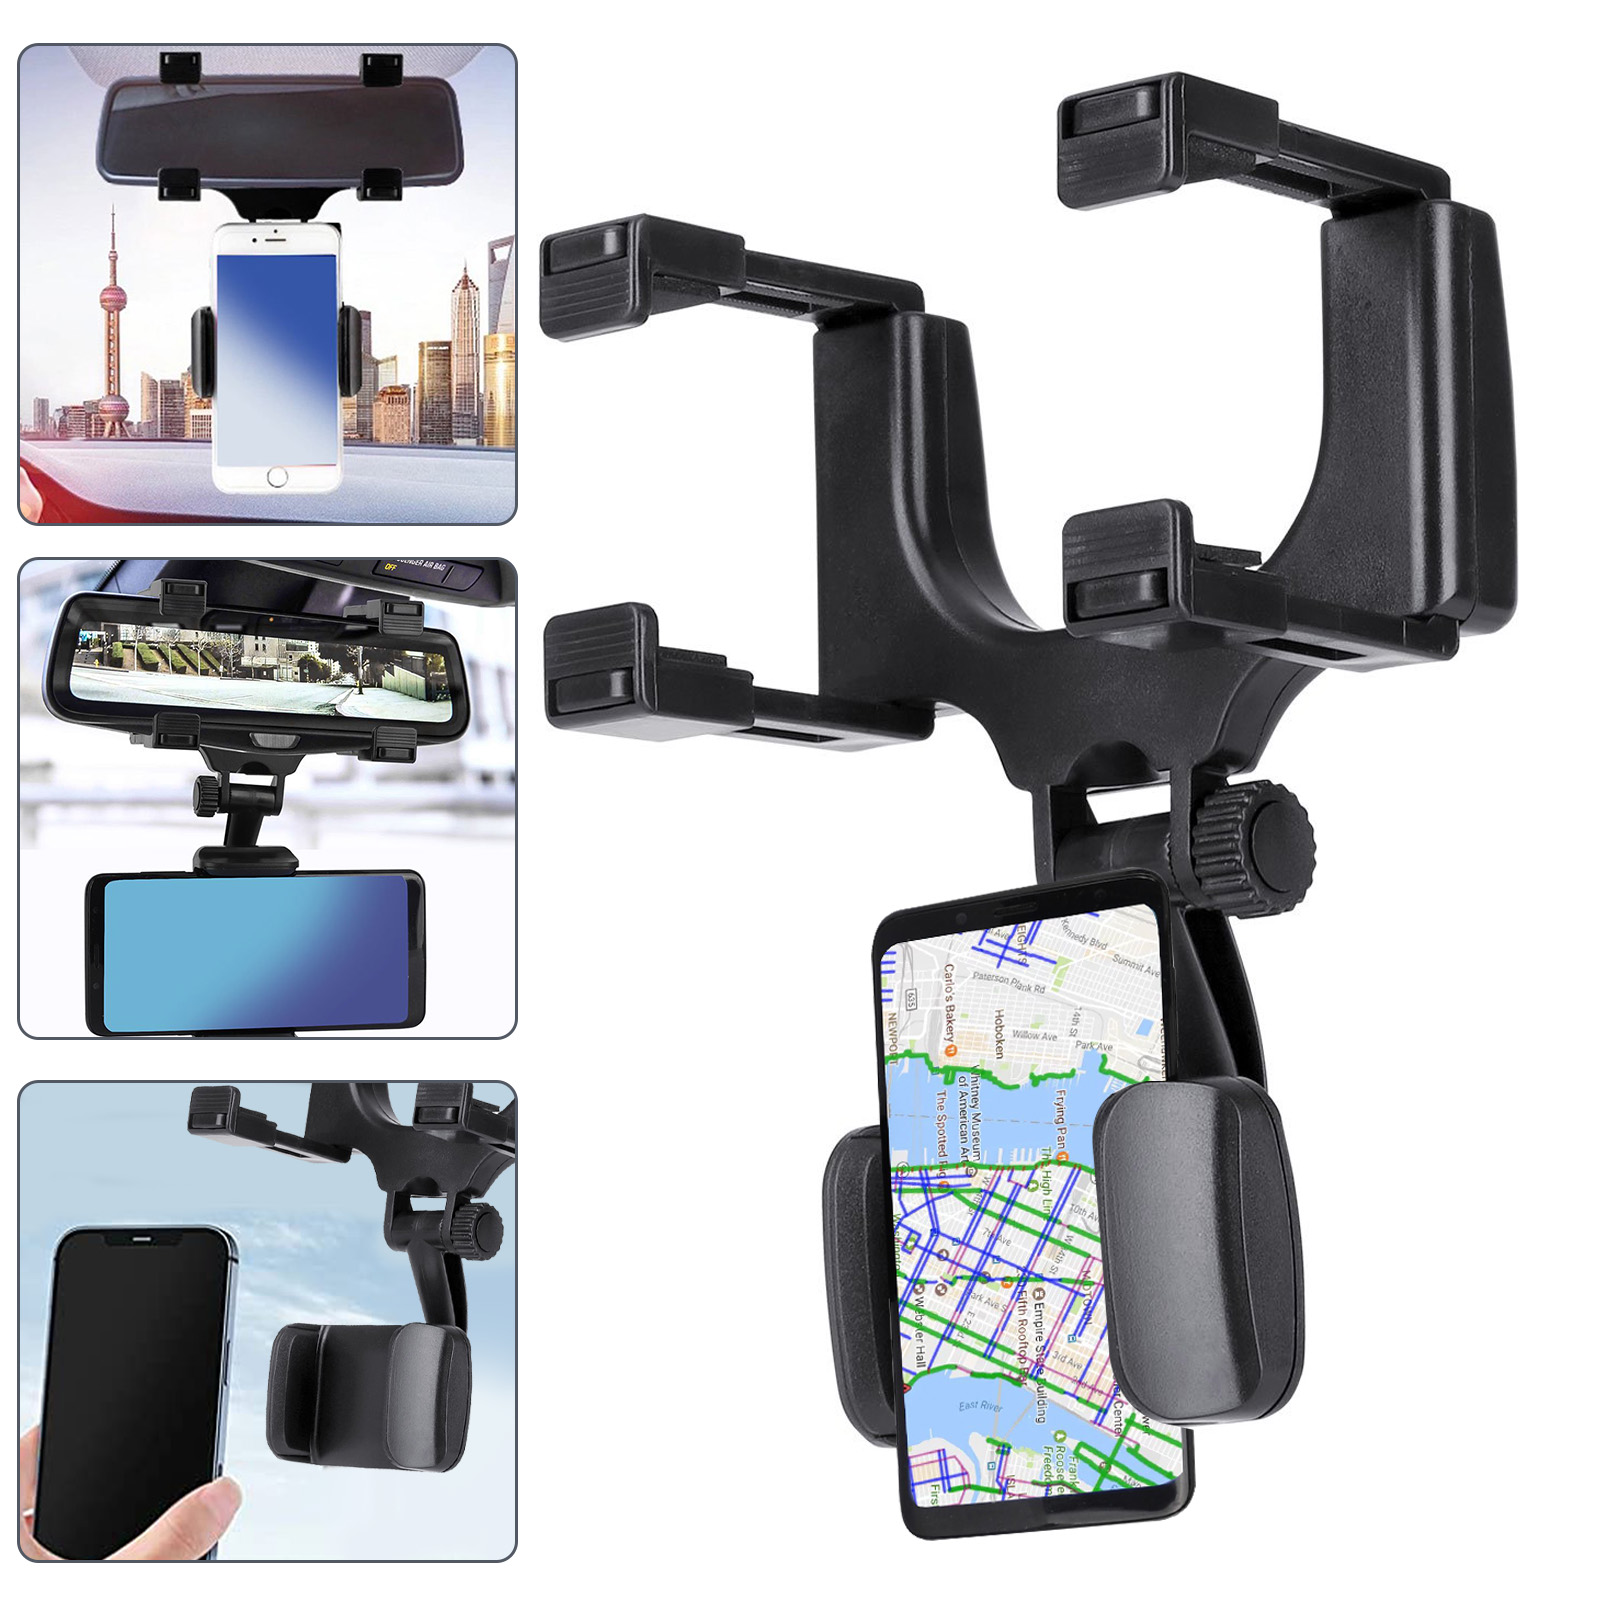 TSV Car Rear View Mirror Mount Grip Clip, 240 Rotation Car Mount Holder, Universal Smartphone Holders Cell Phone Mount Fit for iPhone 13/12/11 Pro Xr Xs Max X, Samsung S21/Galaxy, HTC, GPS, Smartphone - image 6 of 9